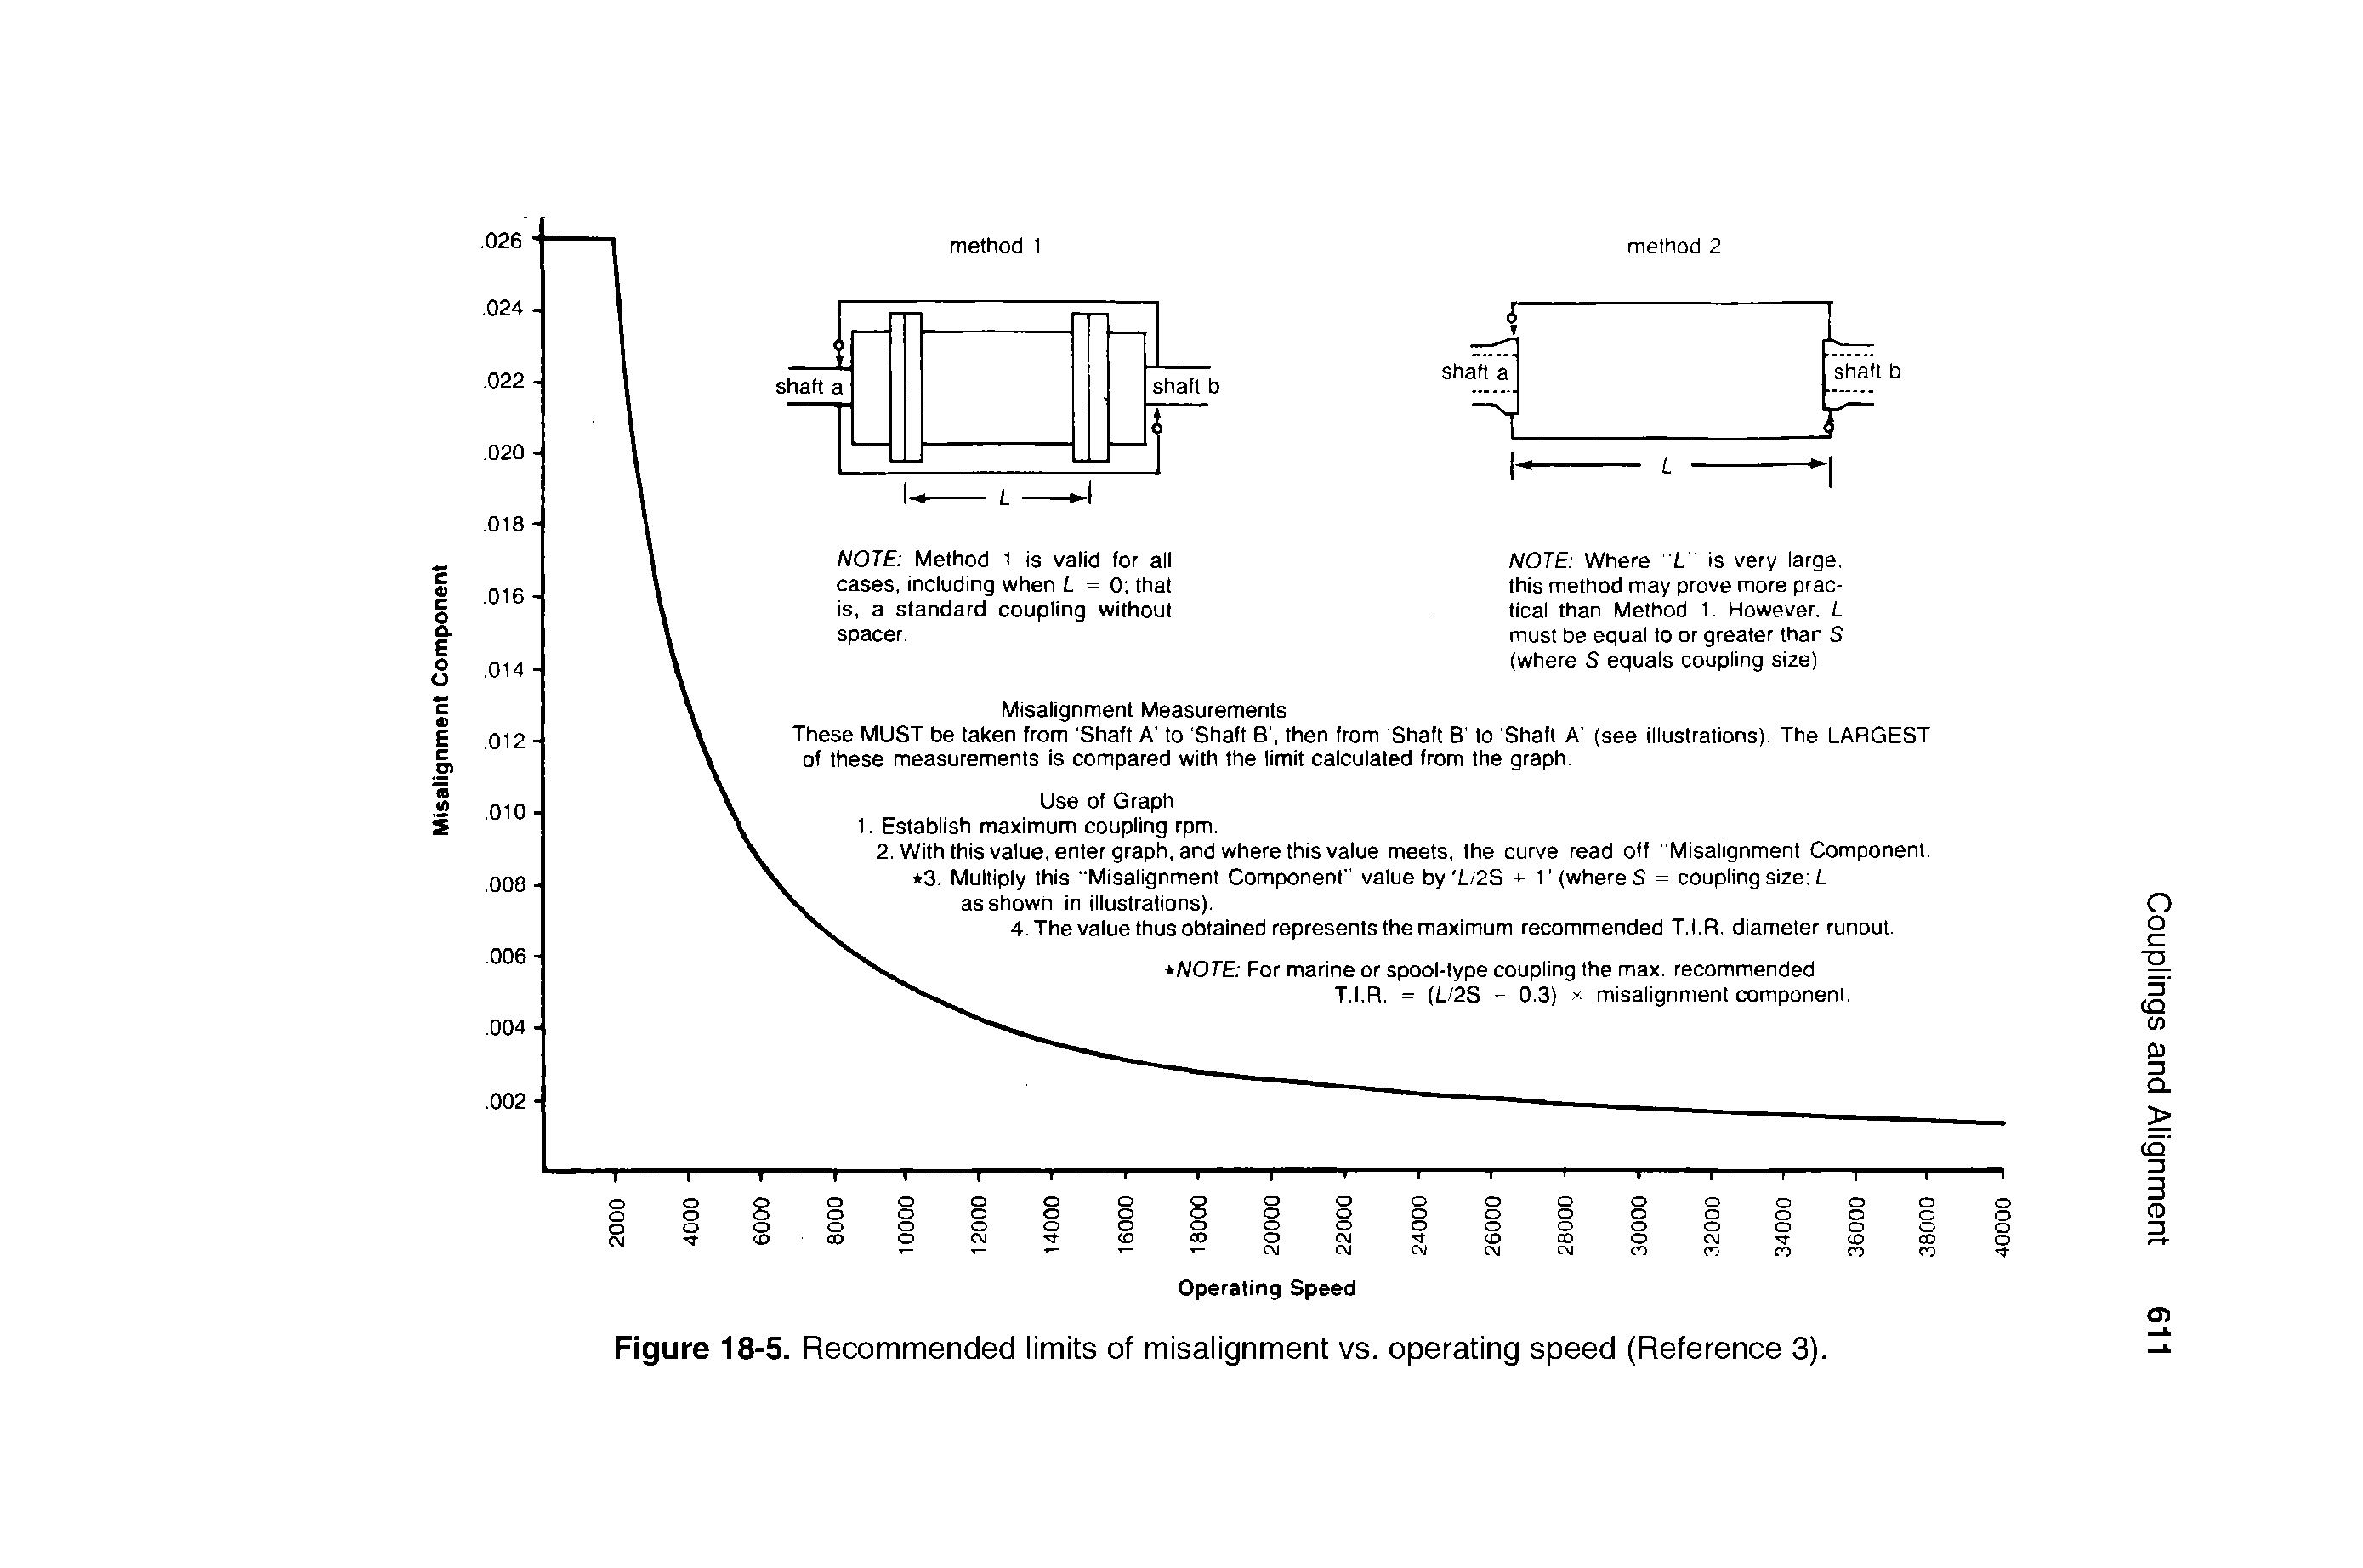 Figure 18-5. Recommended limits of misalignment vs. operating speed (Reference 3).